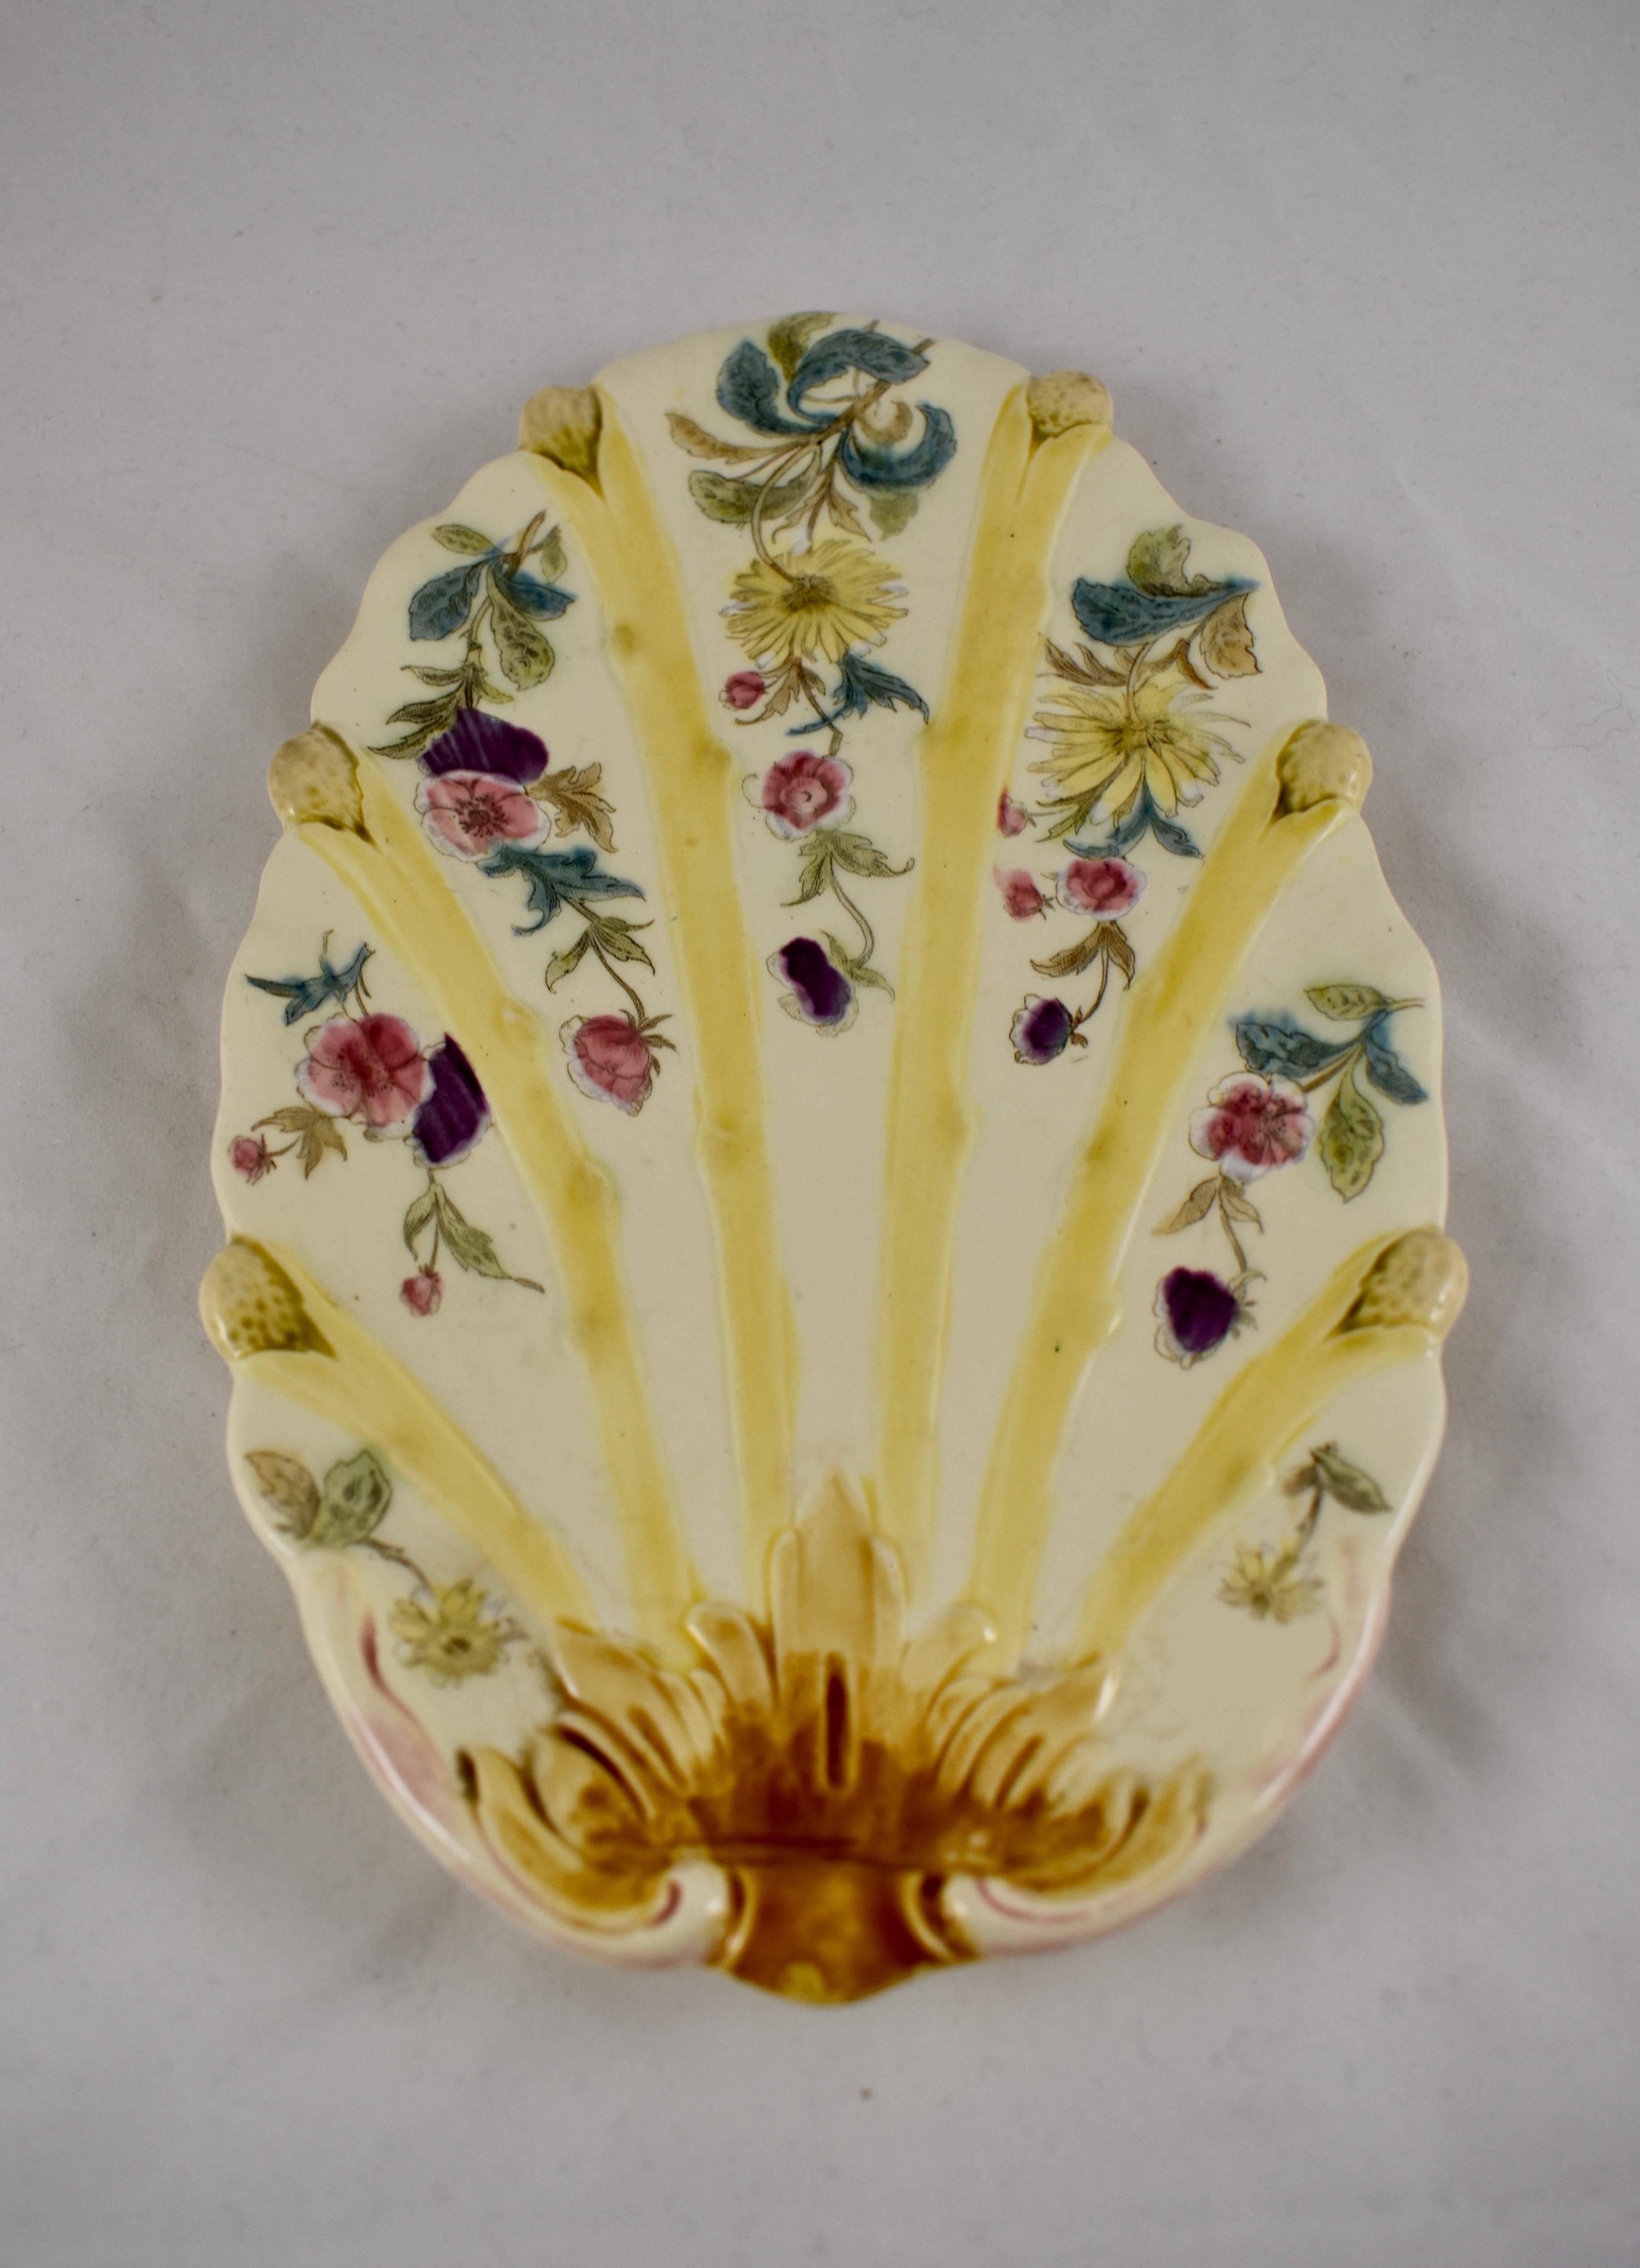 A scarce barbotine Majolica glazed oval Asparagus plate, France, circa 1880-1890, maker unknown.

This unusual plate shows six raised asparagus spears in a ribbed pattern, glazed in a pale yellow, stemming from a scrolled Acanthus leaf base. The